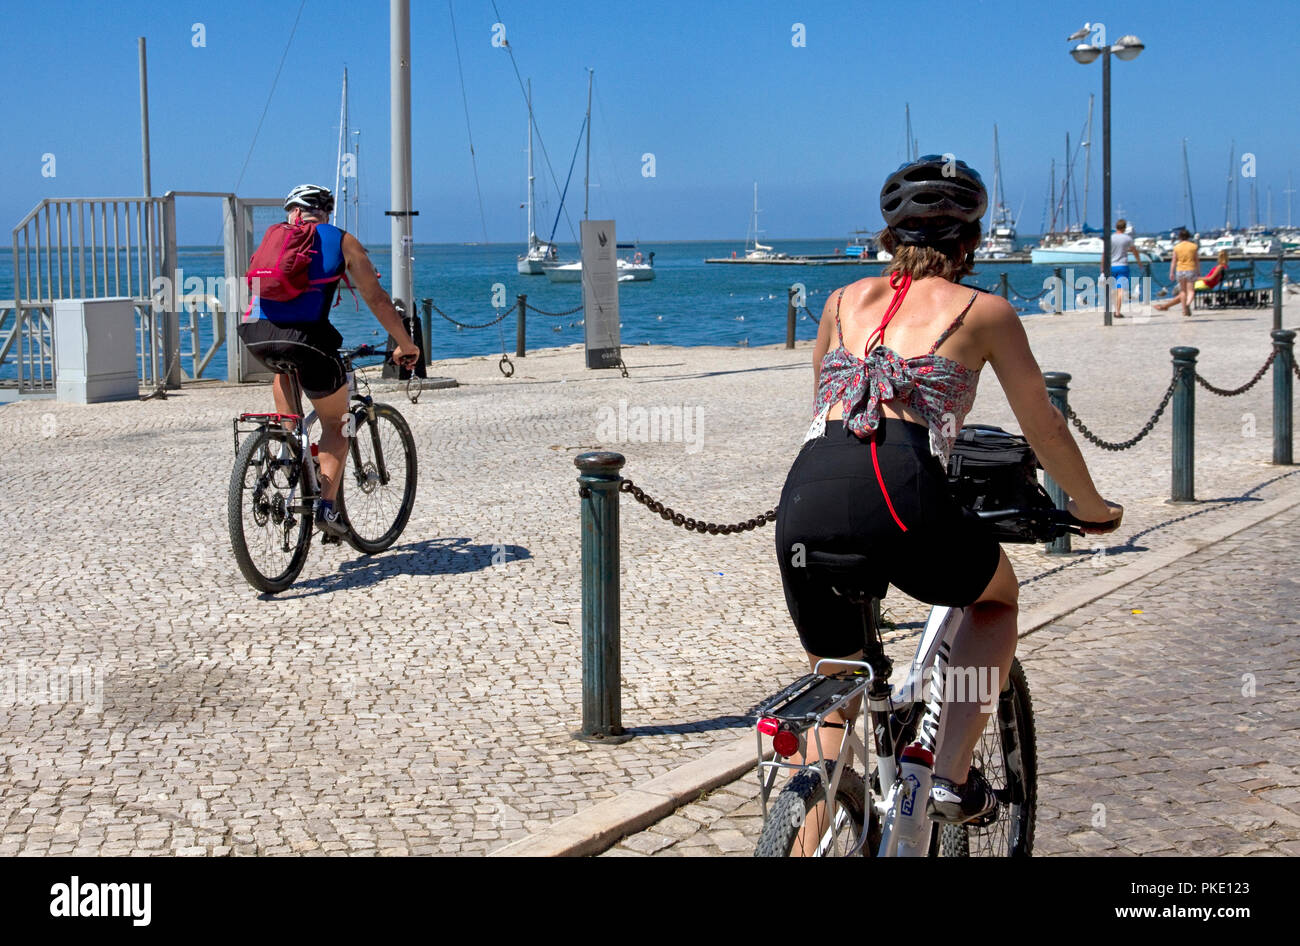 Cyclists on waterfront promenade. Olhao, Algarve, Portugal Stock Photo